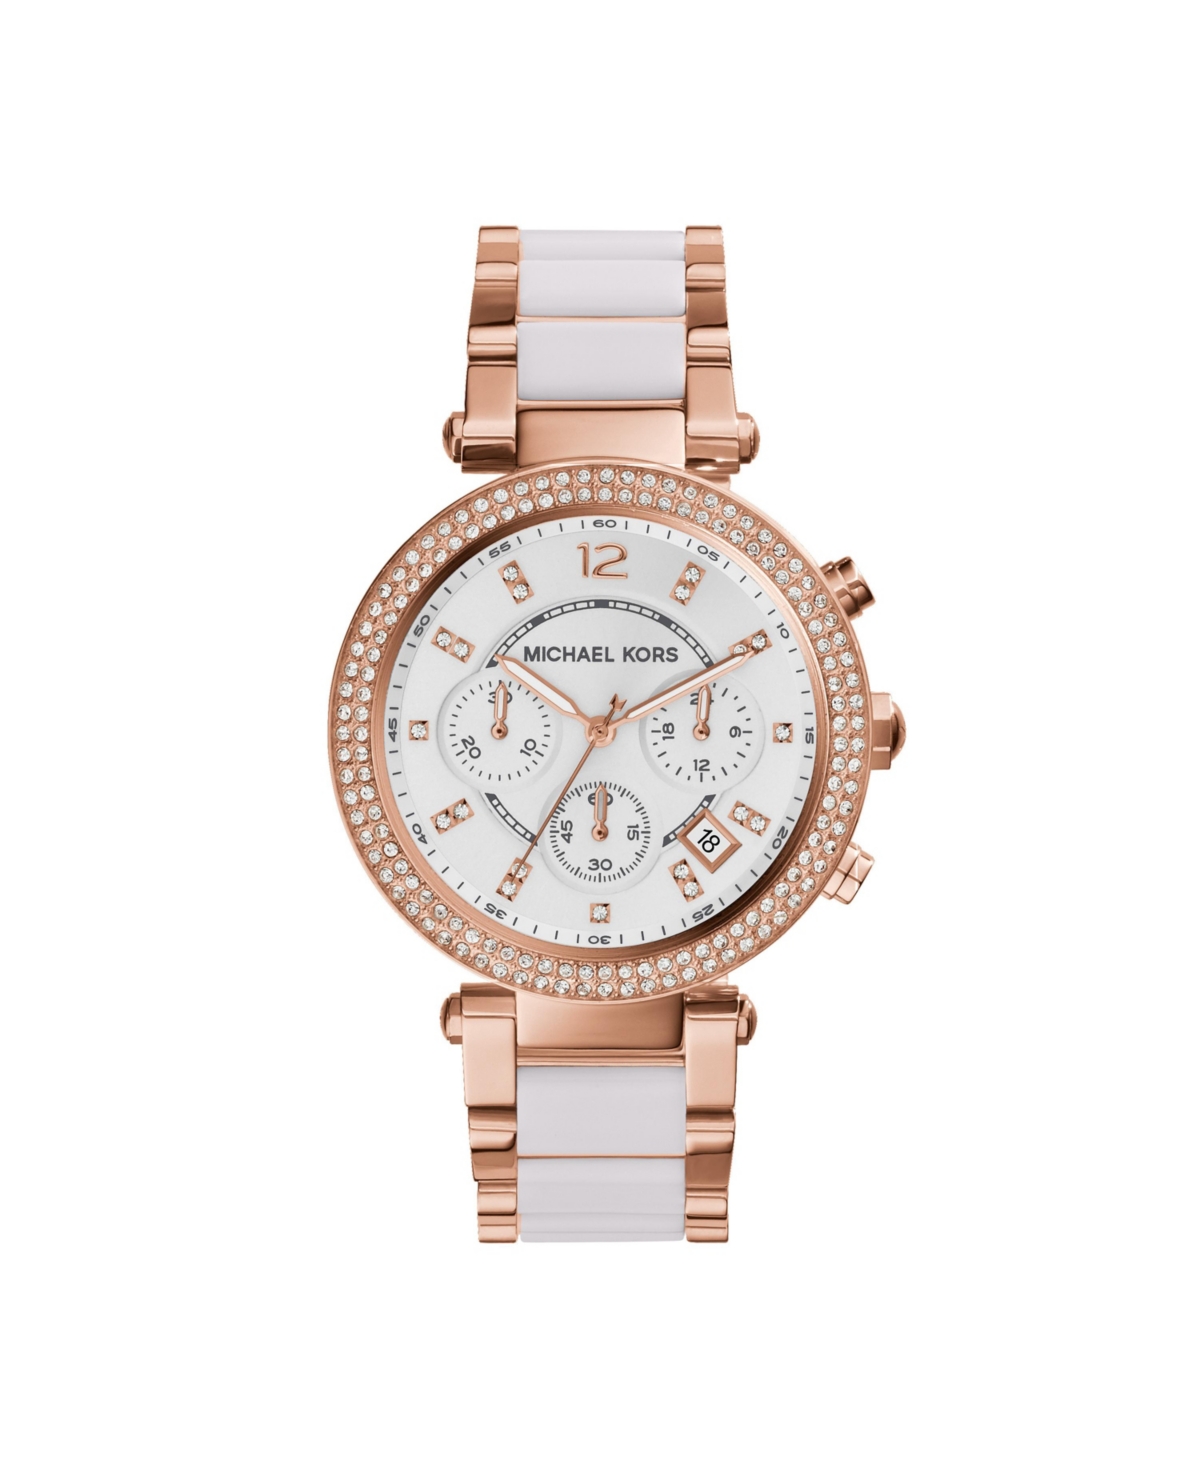 Michael Kors Women's Parker Chronograph Two-Tone Stainless Steel Bracelet  Watch 39mm & Reviews - All Watches - Jewelry & Watches - Macy's